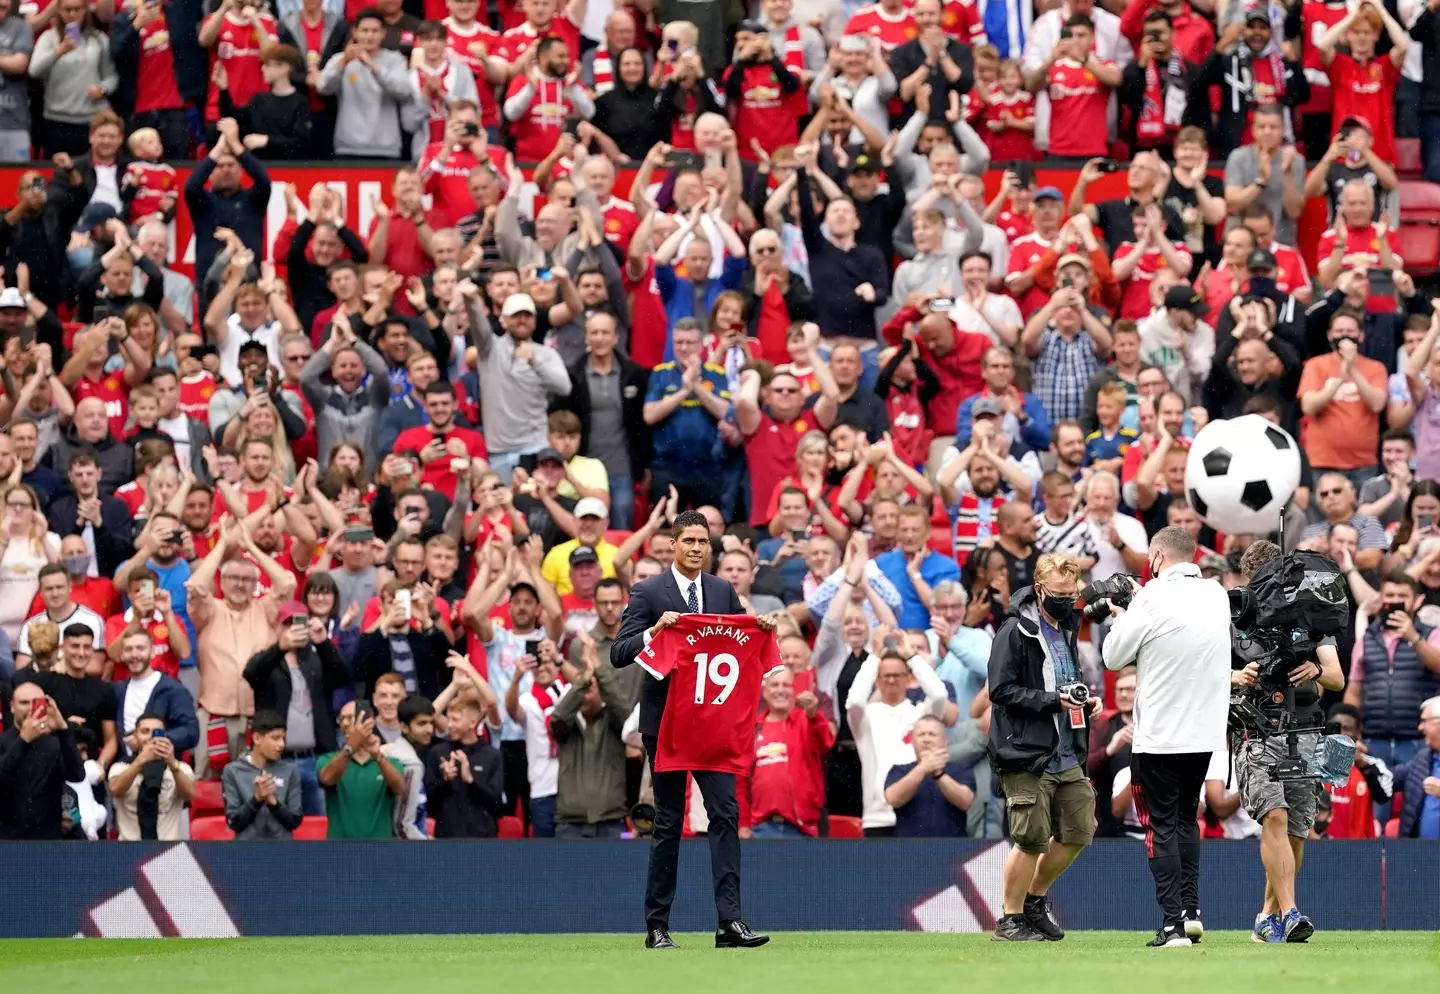 Raphael Varane's unveiling at Manchester United kicked off a 5-1 victory against Leeds United on the opening weekend of the Premier League season. (Alamy)